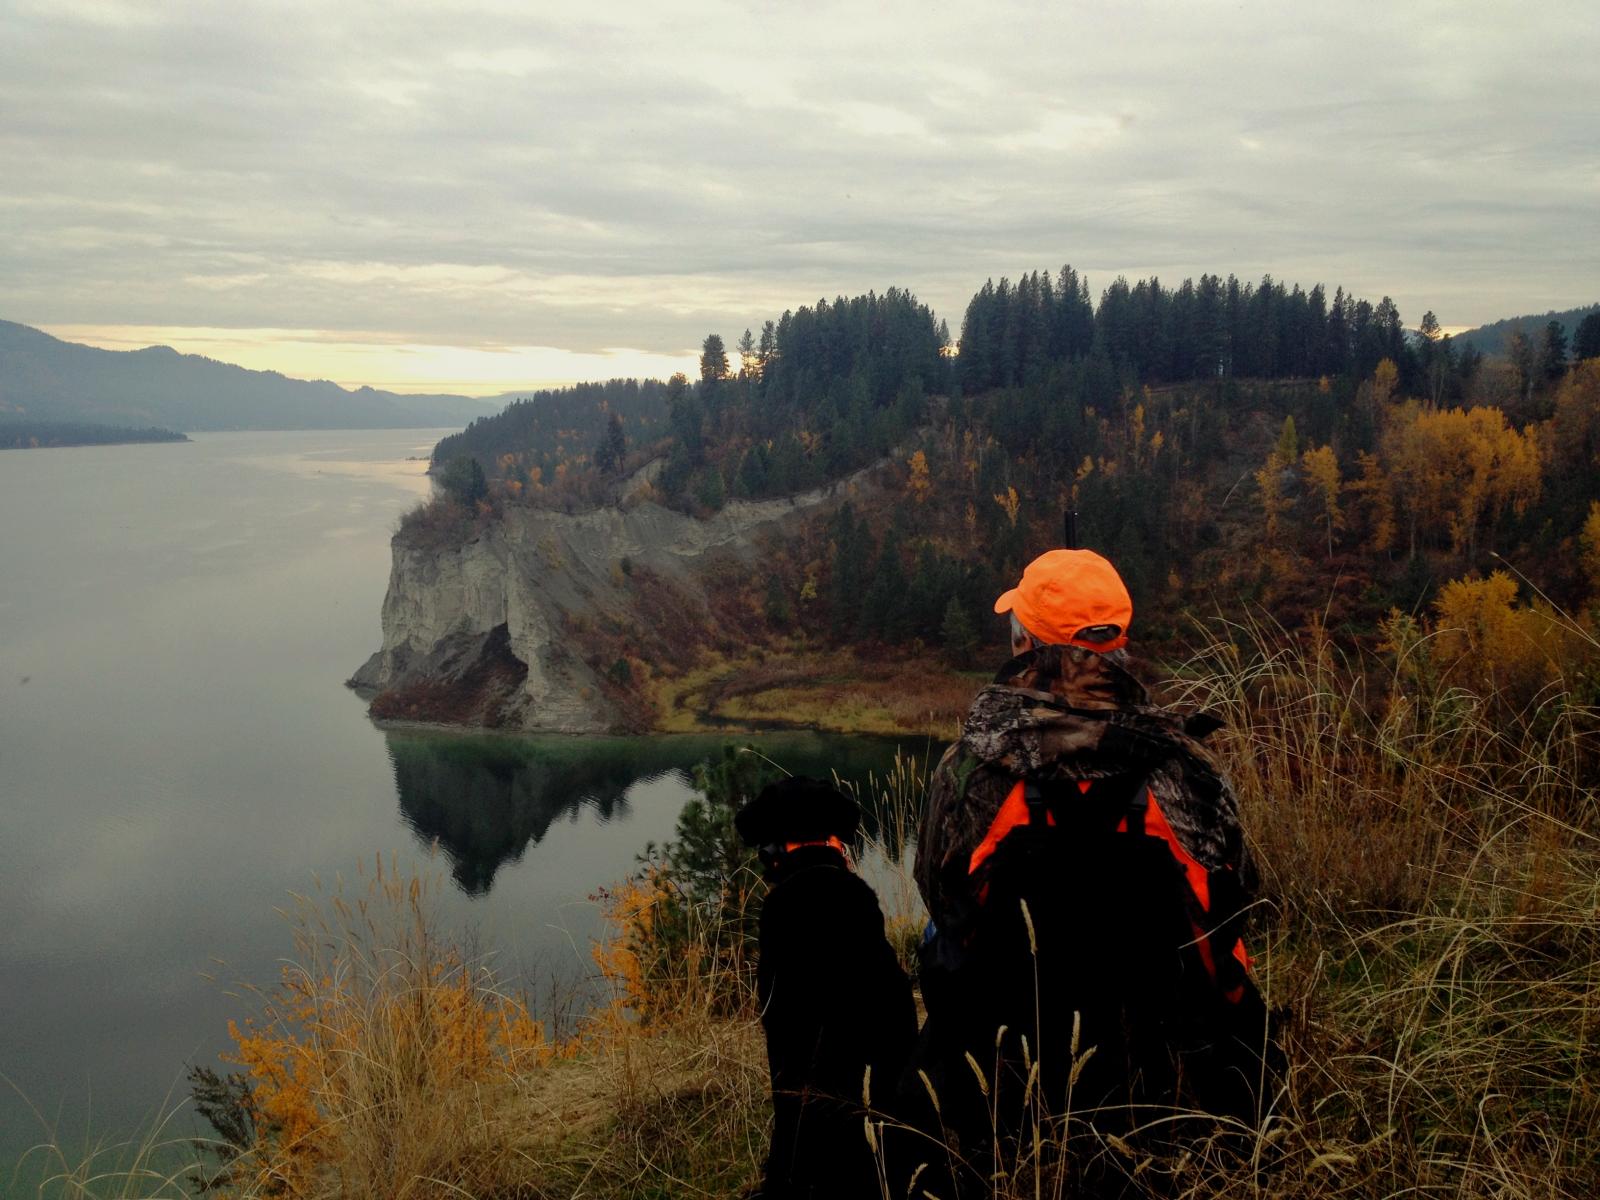 A hunter and their dog sitting on a high overlook in a wildlife area, with a lake and colorful fall trees in the distance